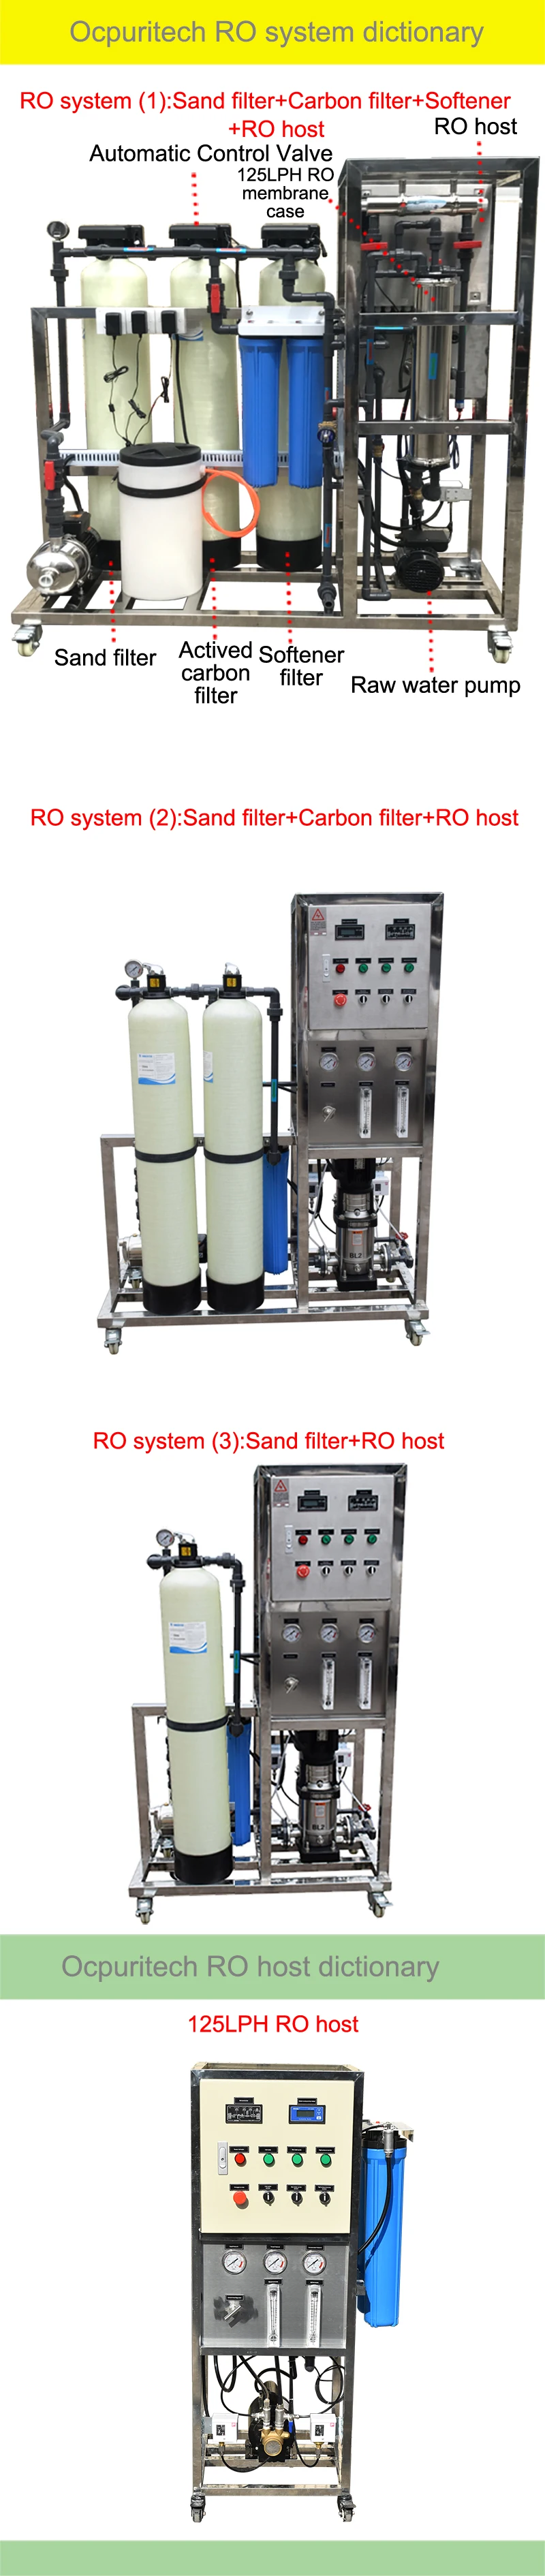 125LPH Ro System Industrial Well River Water Treatment Purifier Reverse Osmosis Pure Purify Purification Machine Borehole Filter